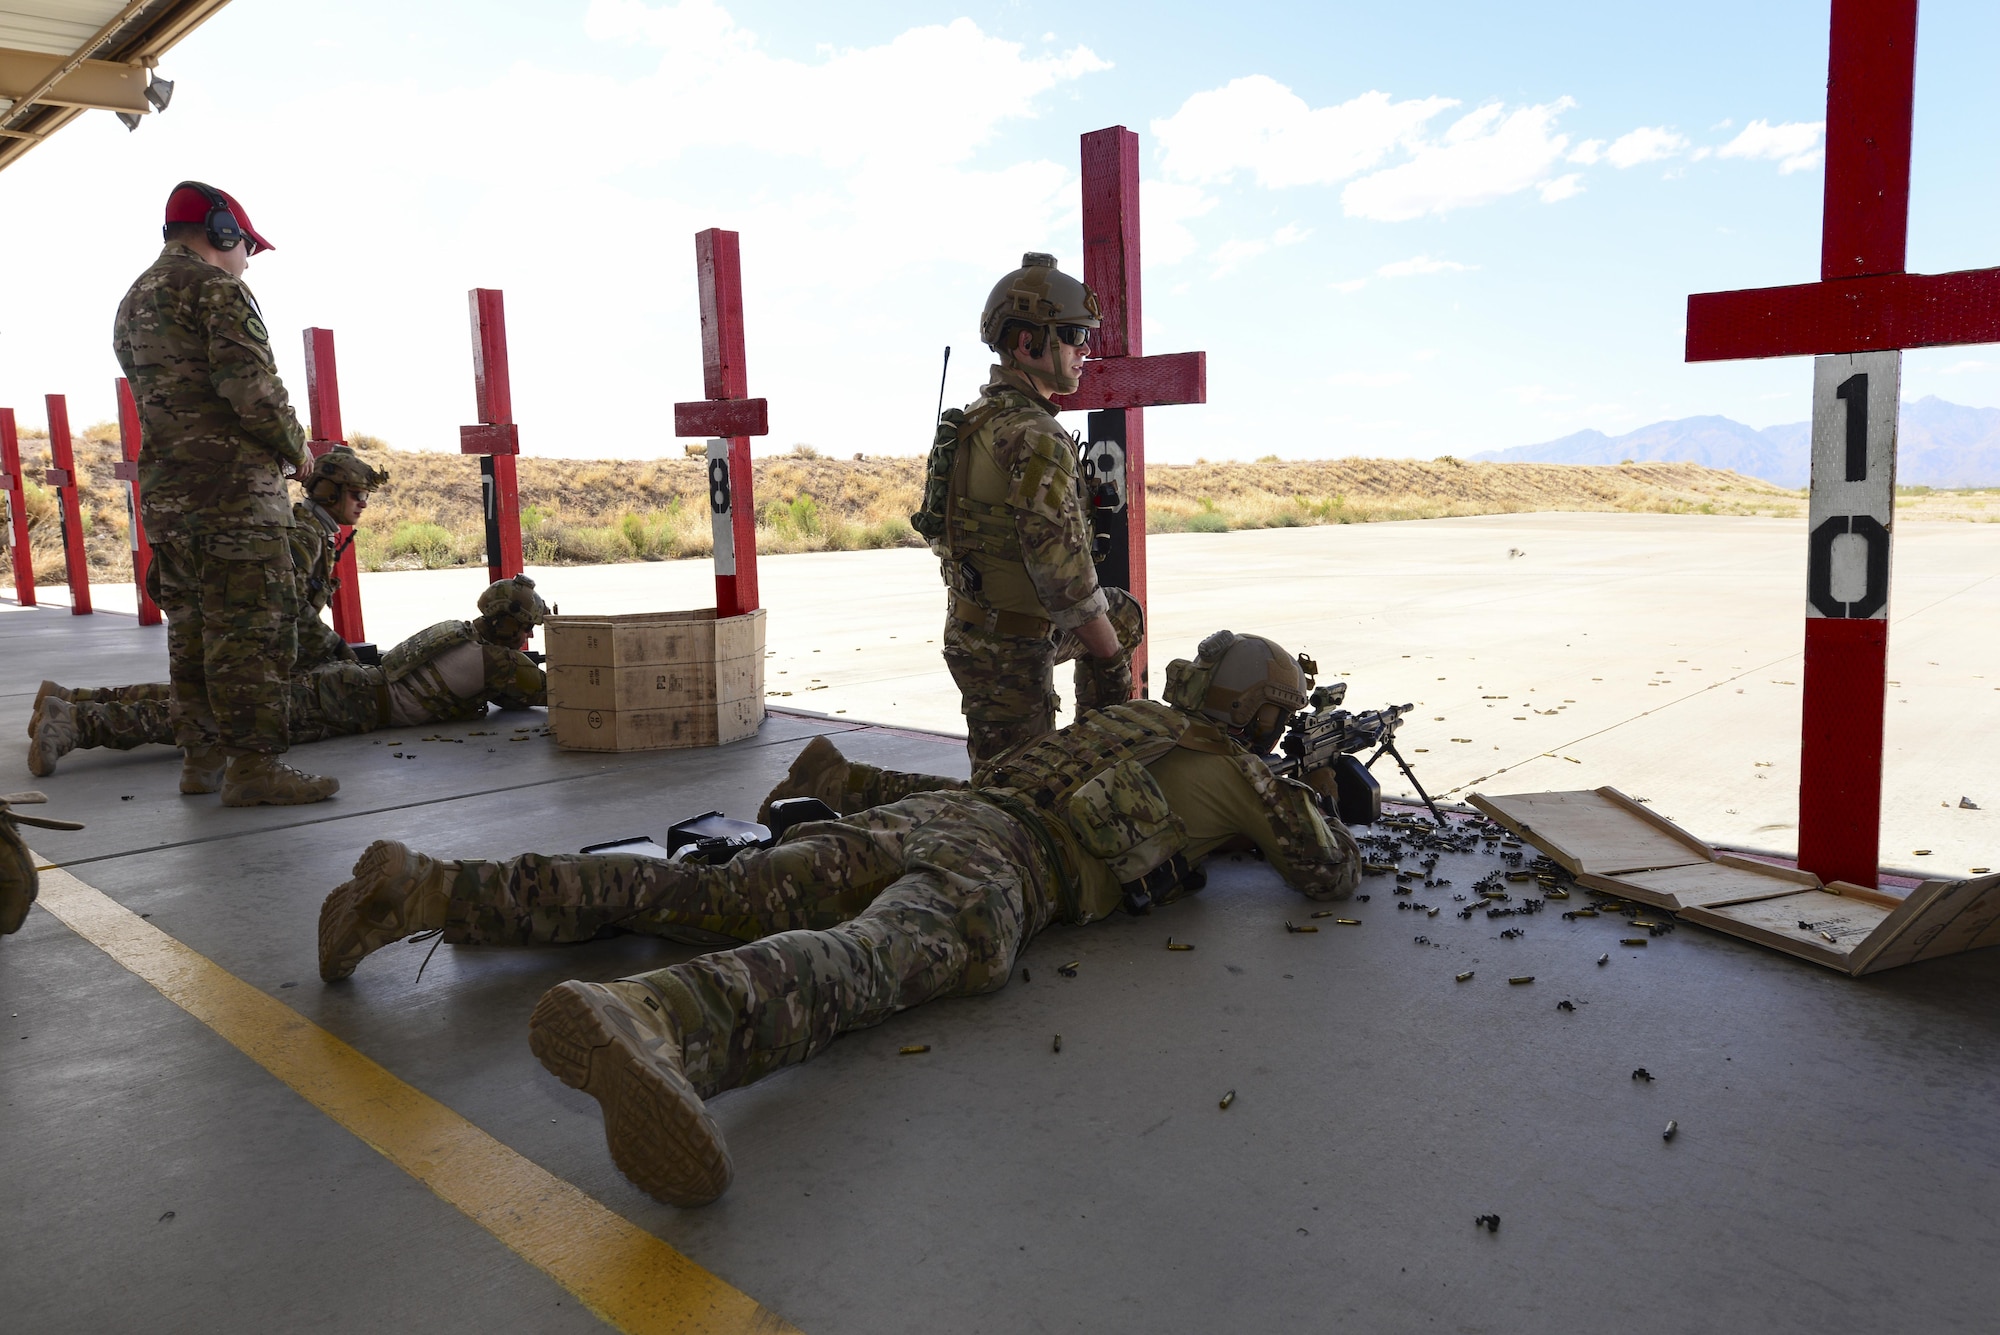 U.S. Air Force pararescuemen fire M249 automatic rifles during the Guardian Angel Mission Qualification Training course at Davis-Monthan Air Force Base, Ariz., May 18, 2017. The MQT is a 90 day course that takes pararescuemen who have completed Air Education and Training Command schooling and helps them achieve their 5-level qualification. (U.S. Air Force photo by Airman 1st Class Nathan H. Barbour)